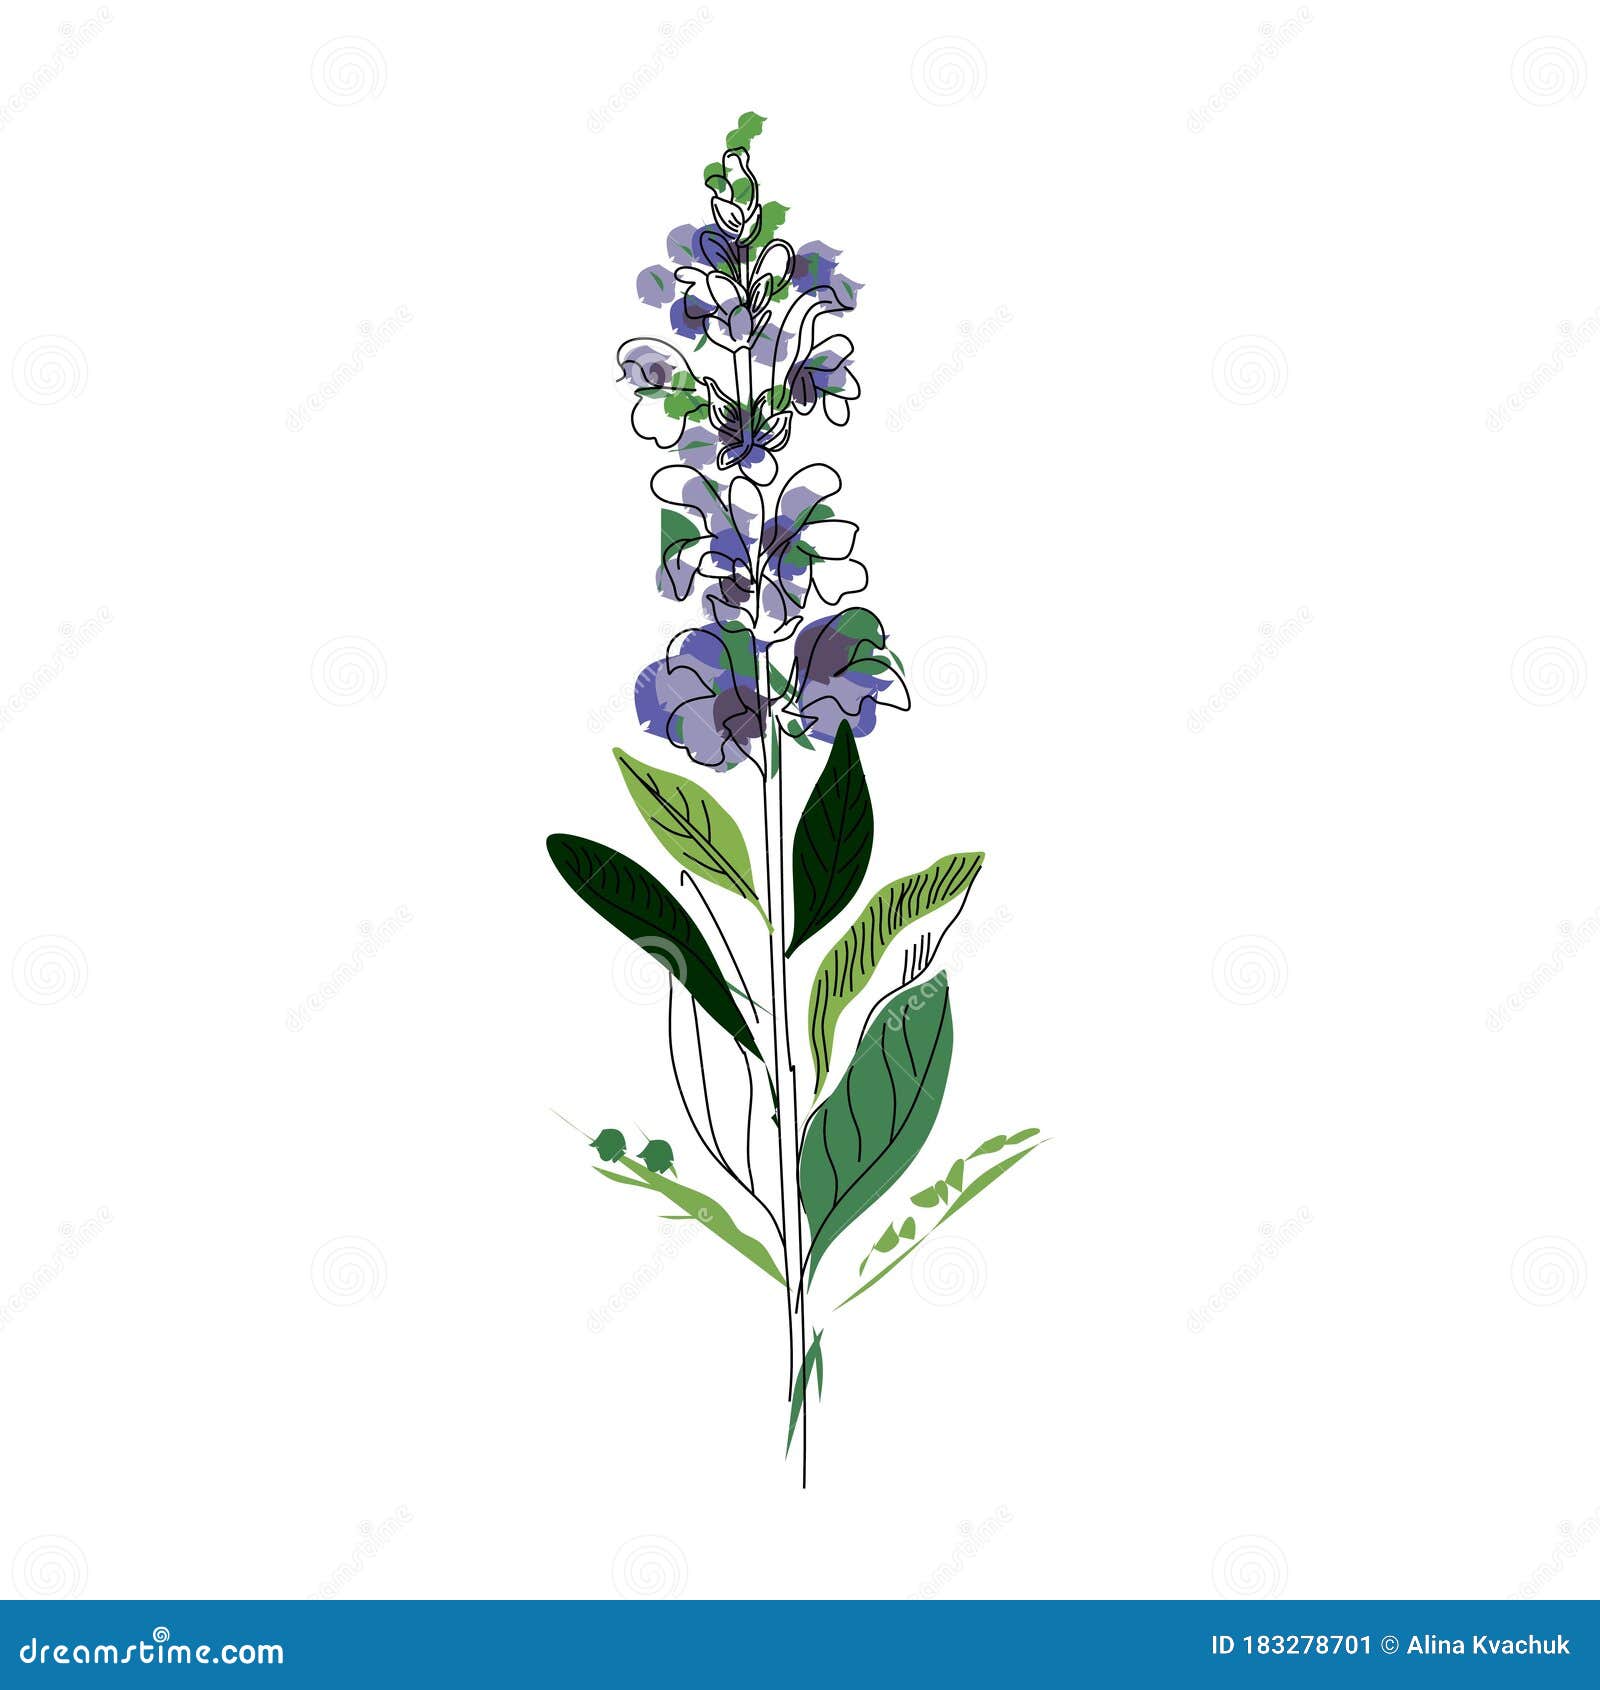 bright branch of sage or botanica sage  lilac. can be used for cards, invitations, banners, posters